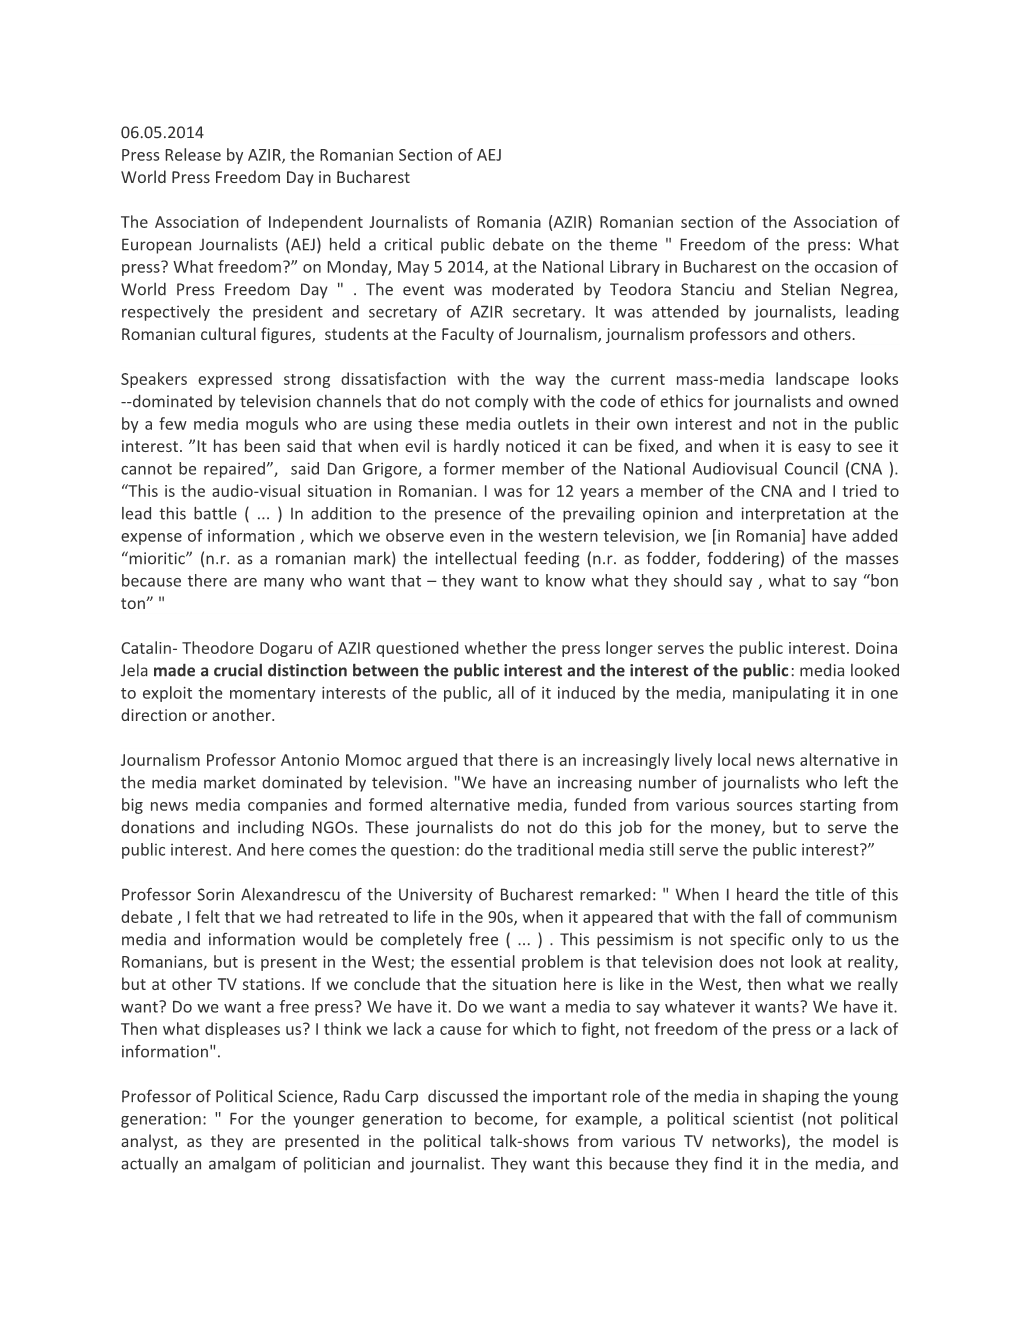 Press Release by AZIR, the Romanian Section of AEJ